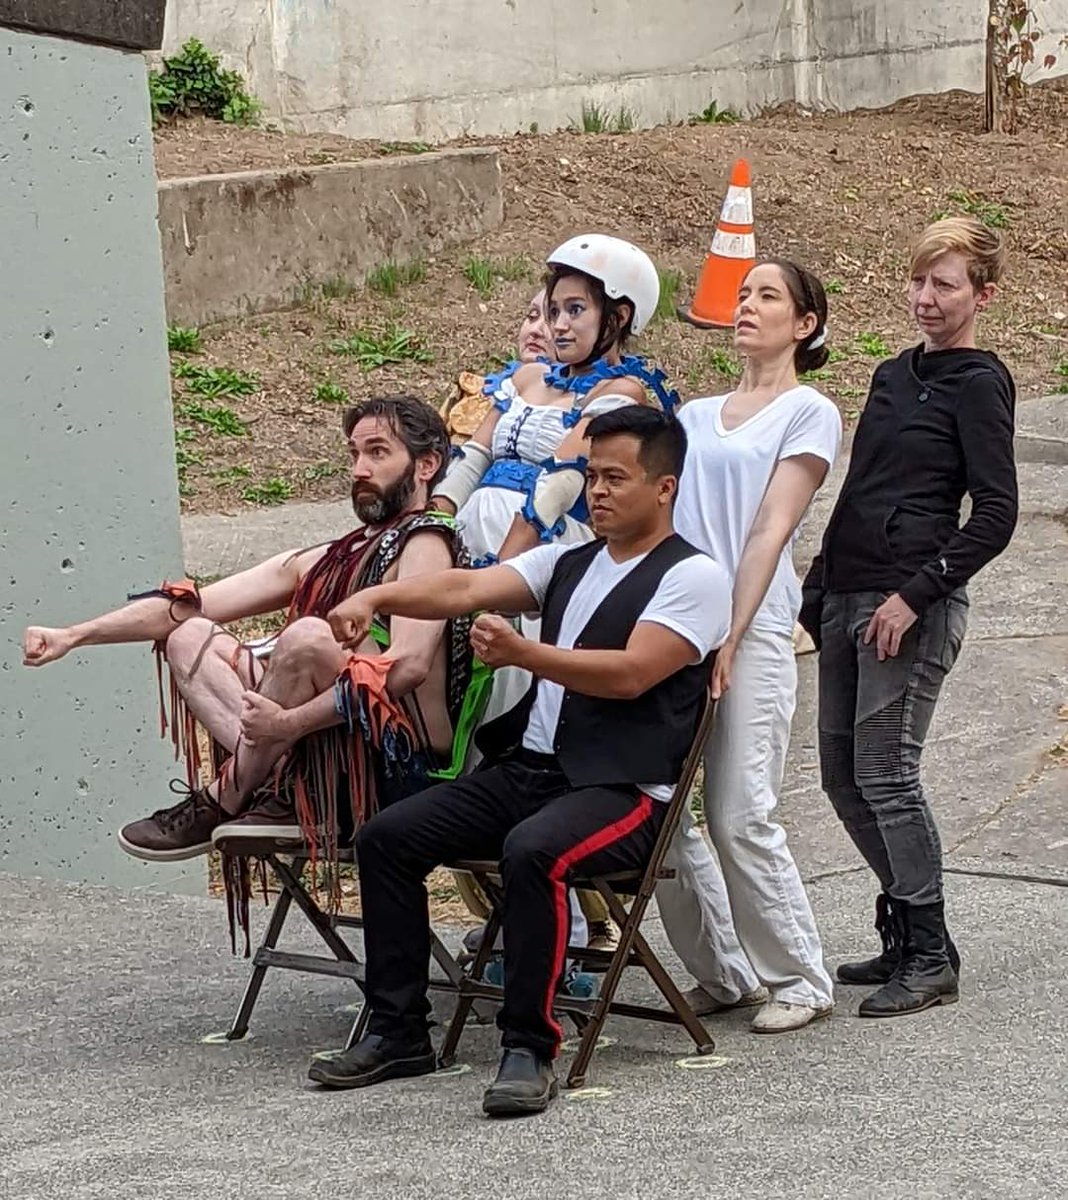 FINAL SHOW TONIGHT!!
Don't miss the exciting finale of the original epic trilogy! You don't want to be the only person who doesn't know whether Luke finally kills Vader! You'll also possibly see me cry so if that's a bonus, there you go. #seattletheater
#outdoortheater
#StarWars